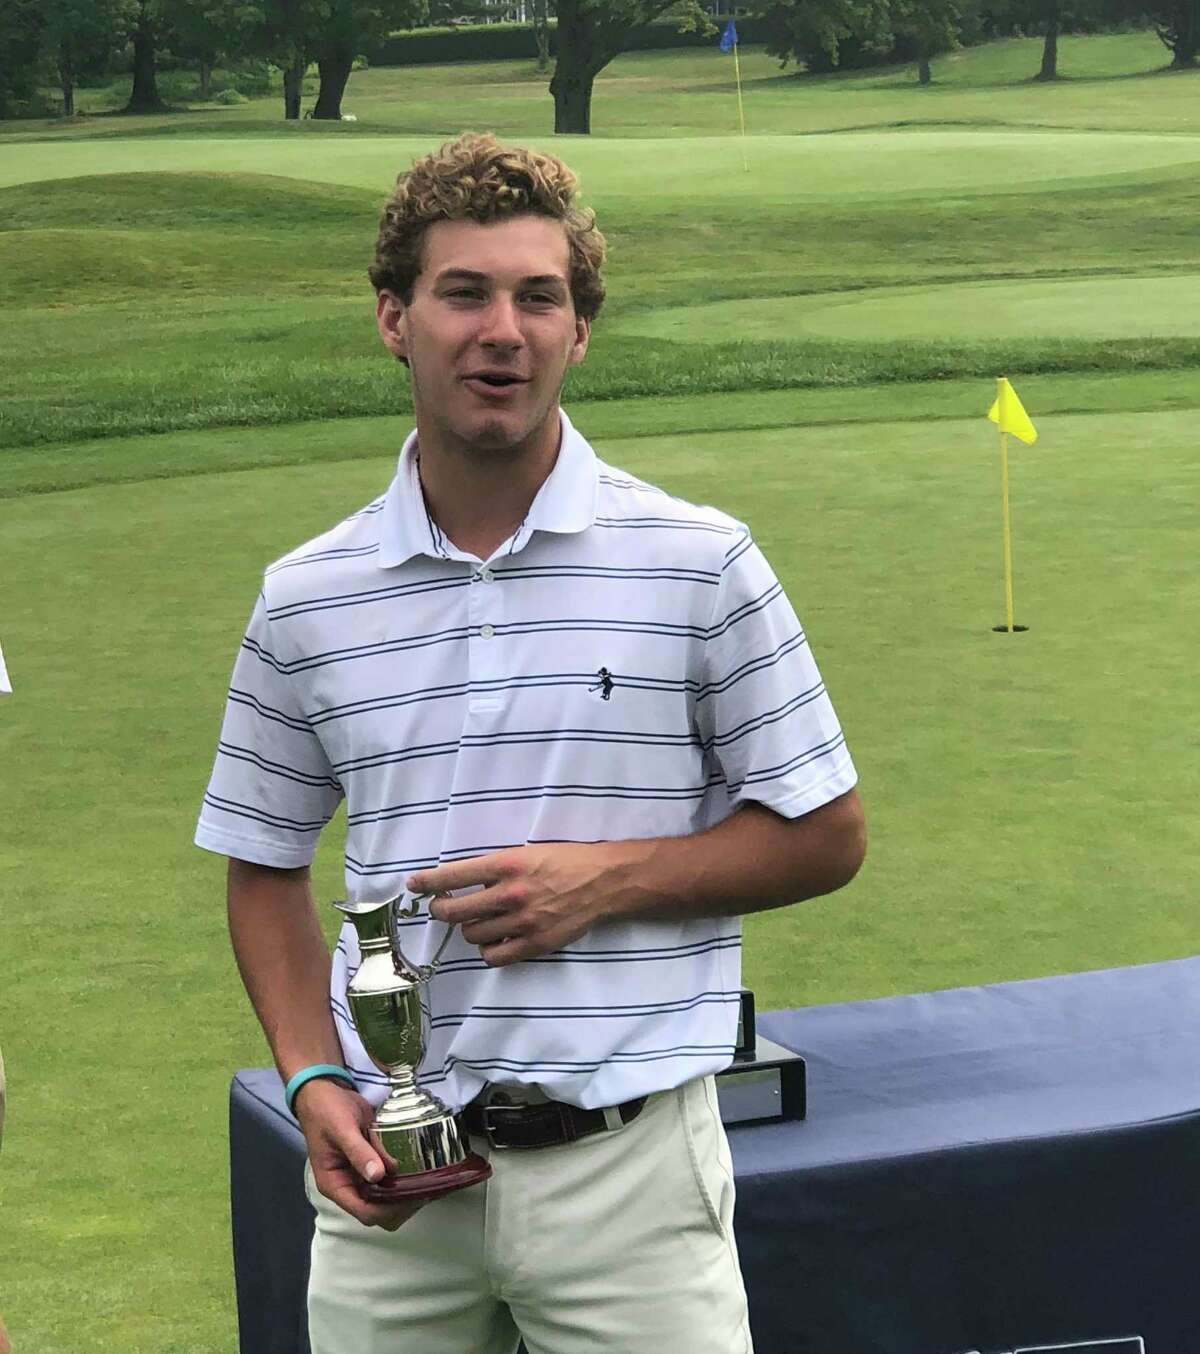 New Canaan's Gunnar Granito took second place at the 78th Connecticut Junior Amateur Championship.